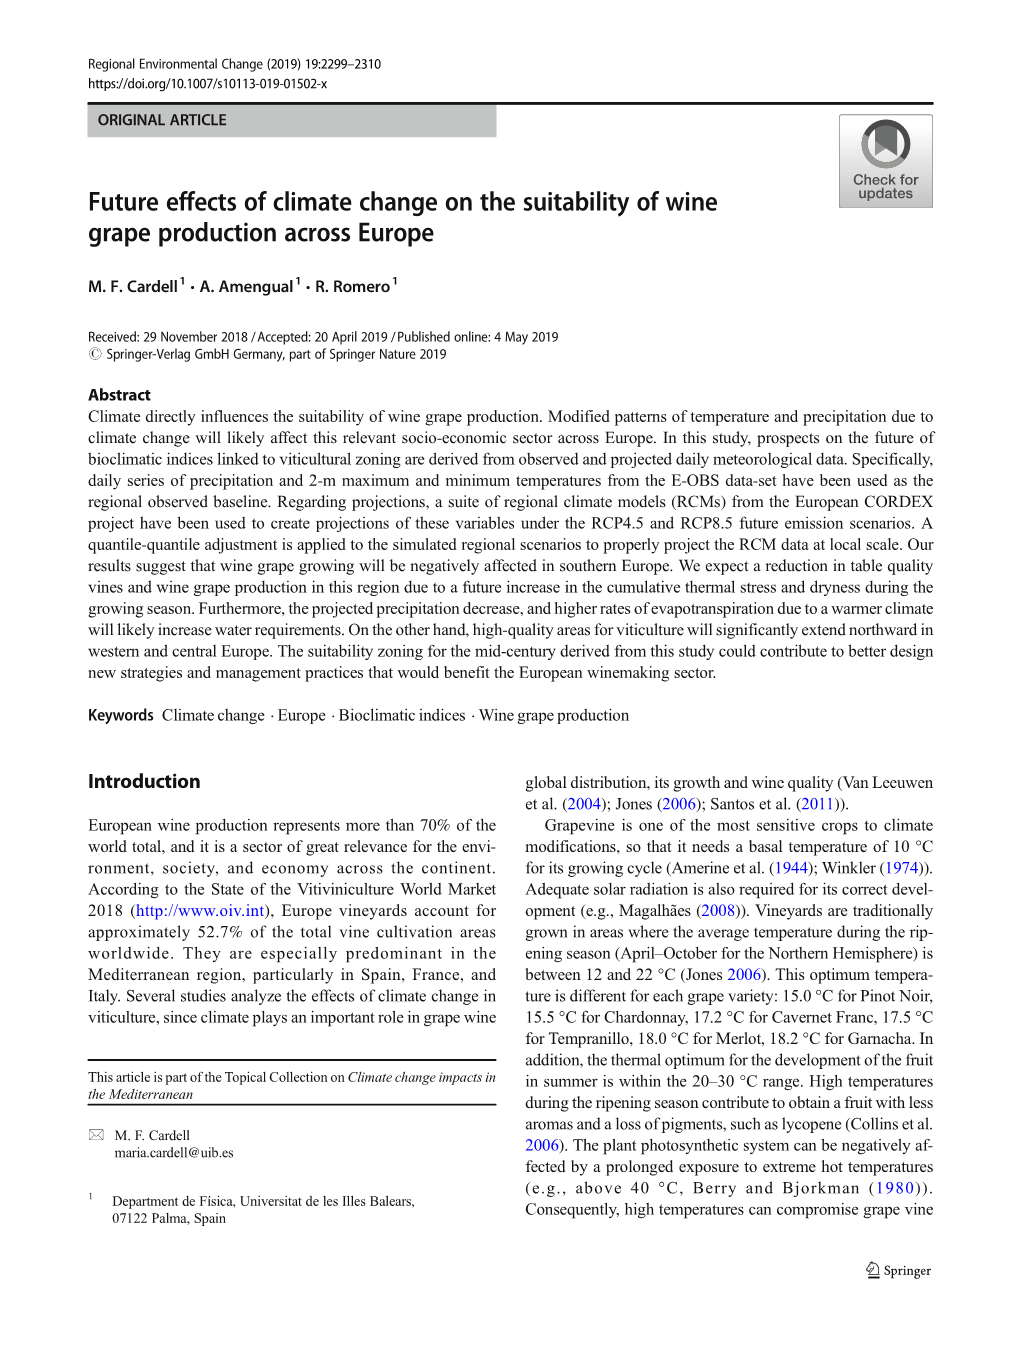 Future Effects of Climate Change on the Suitability of Wine Grape Production Across Europe